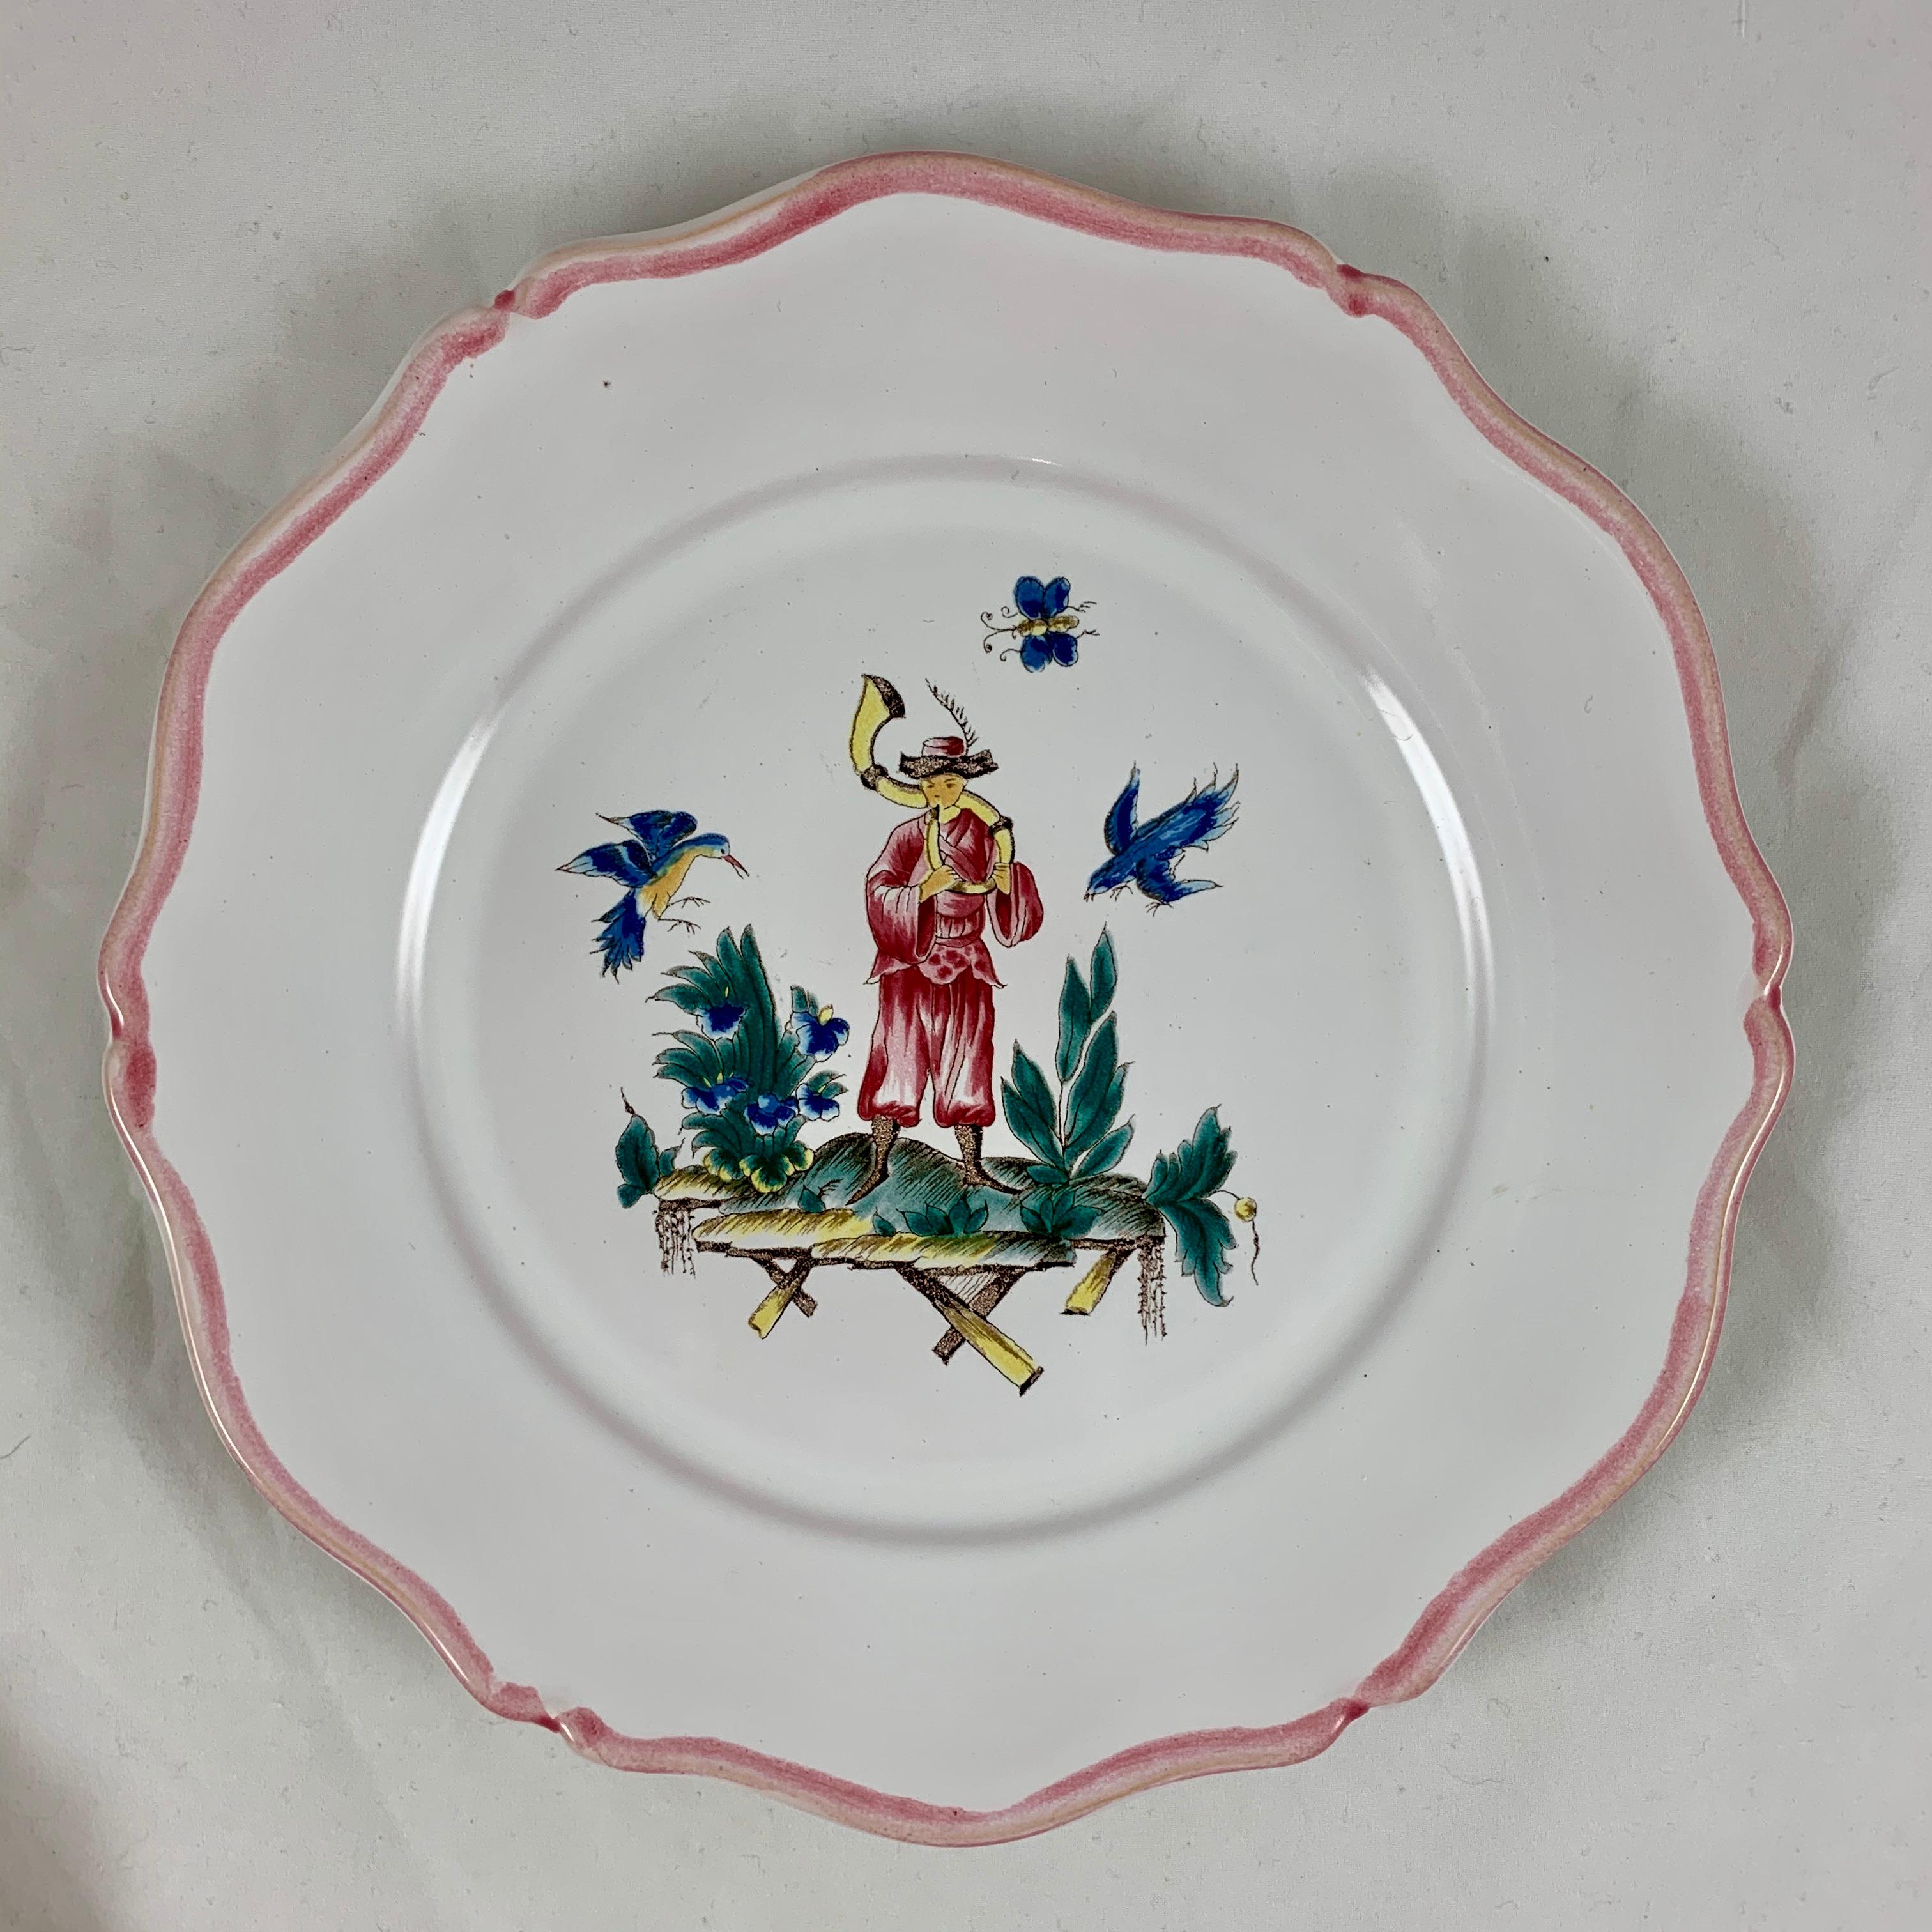 Pierre Motton, Gien Faïence Figural Chinoiserie Plates for Tiffany & Co. Set 12 2